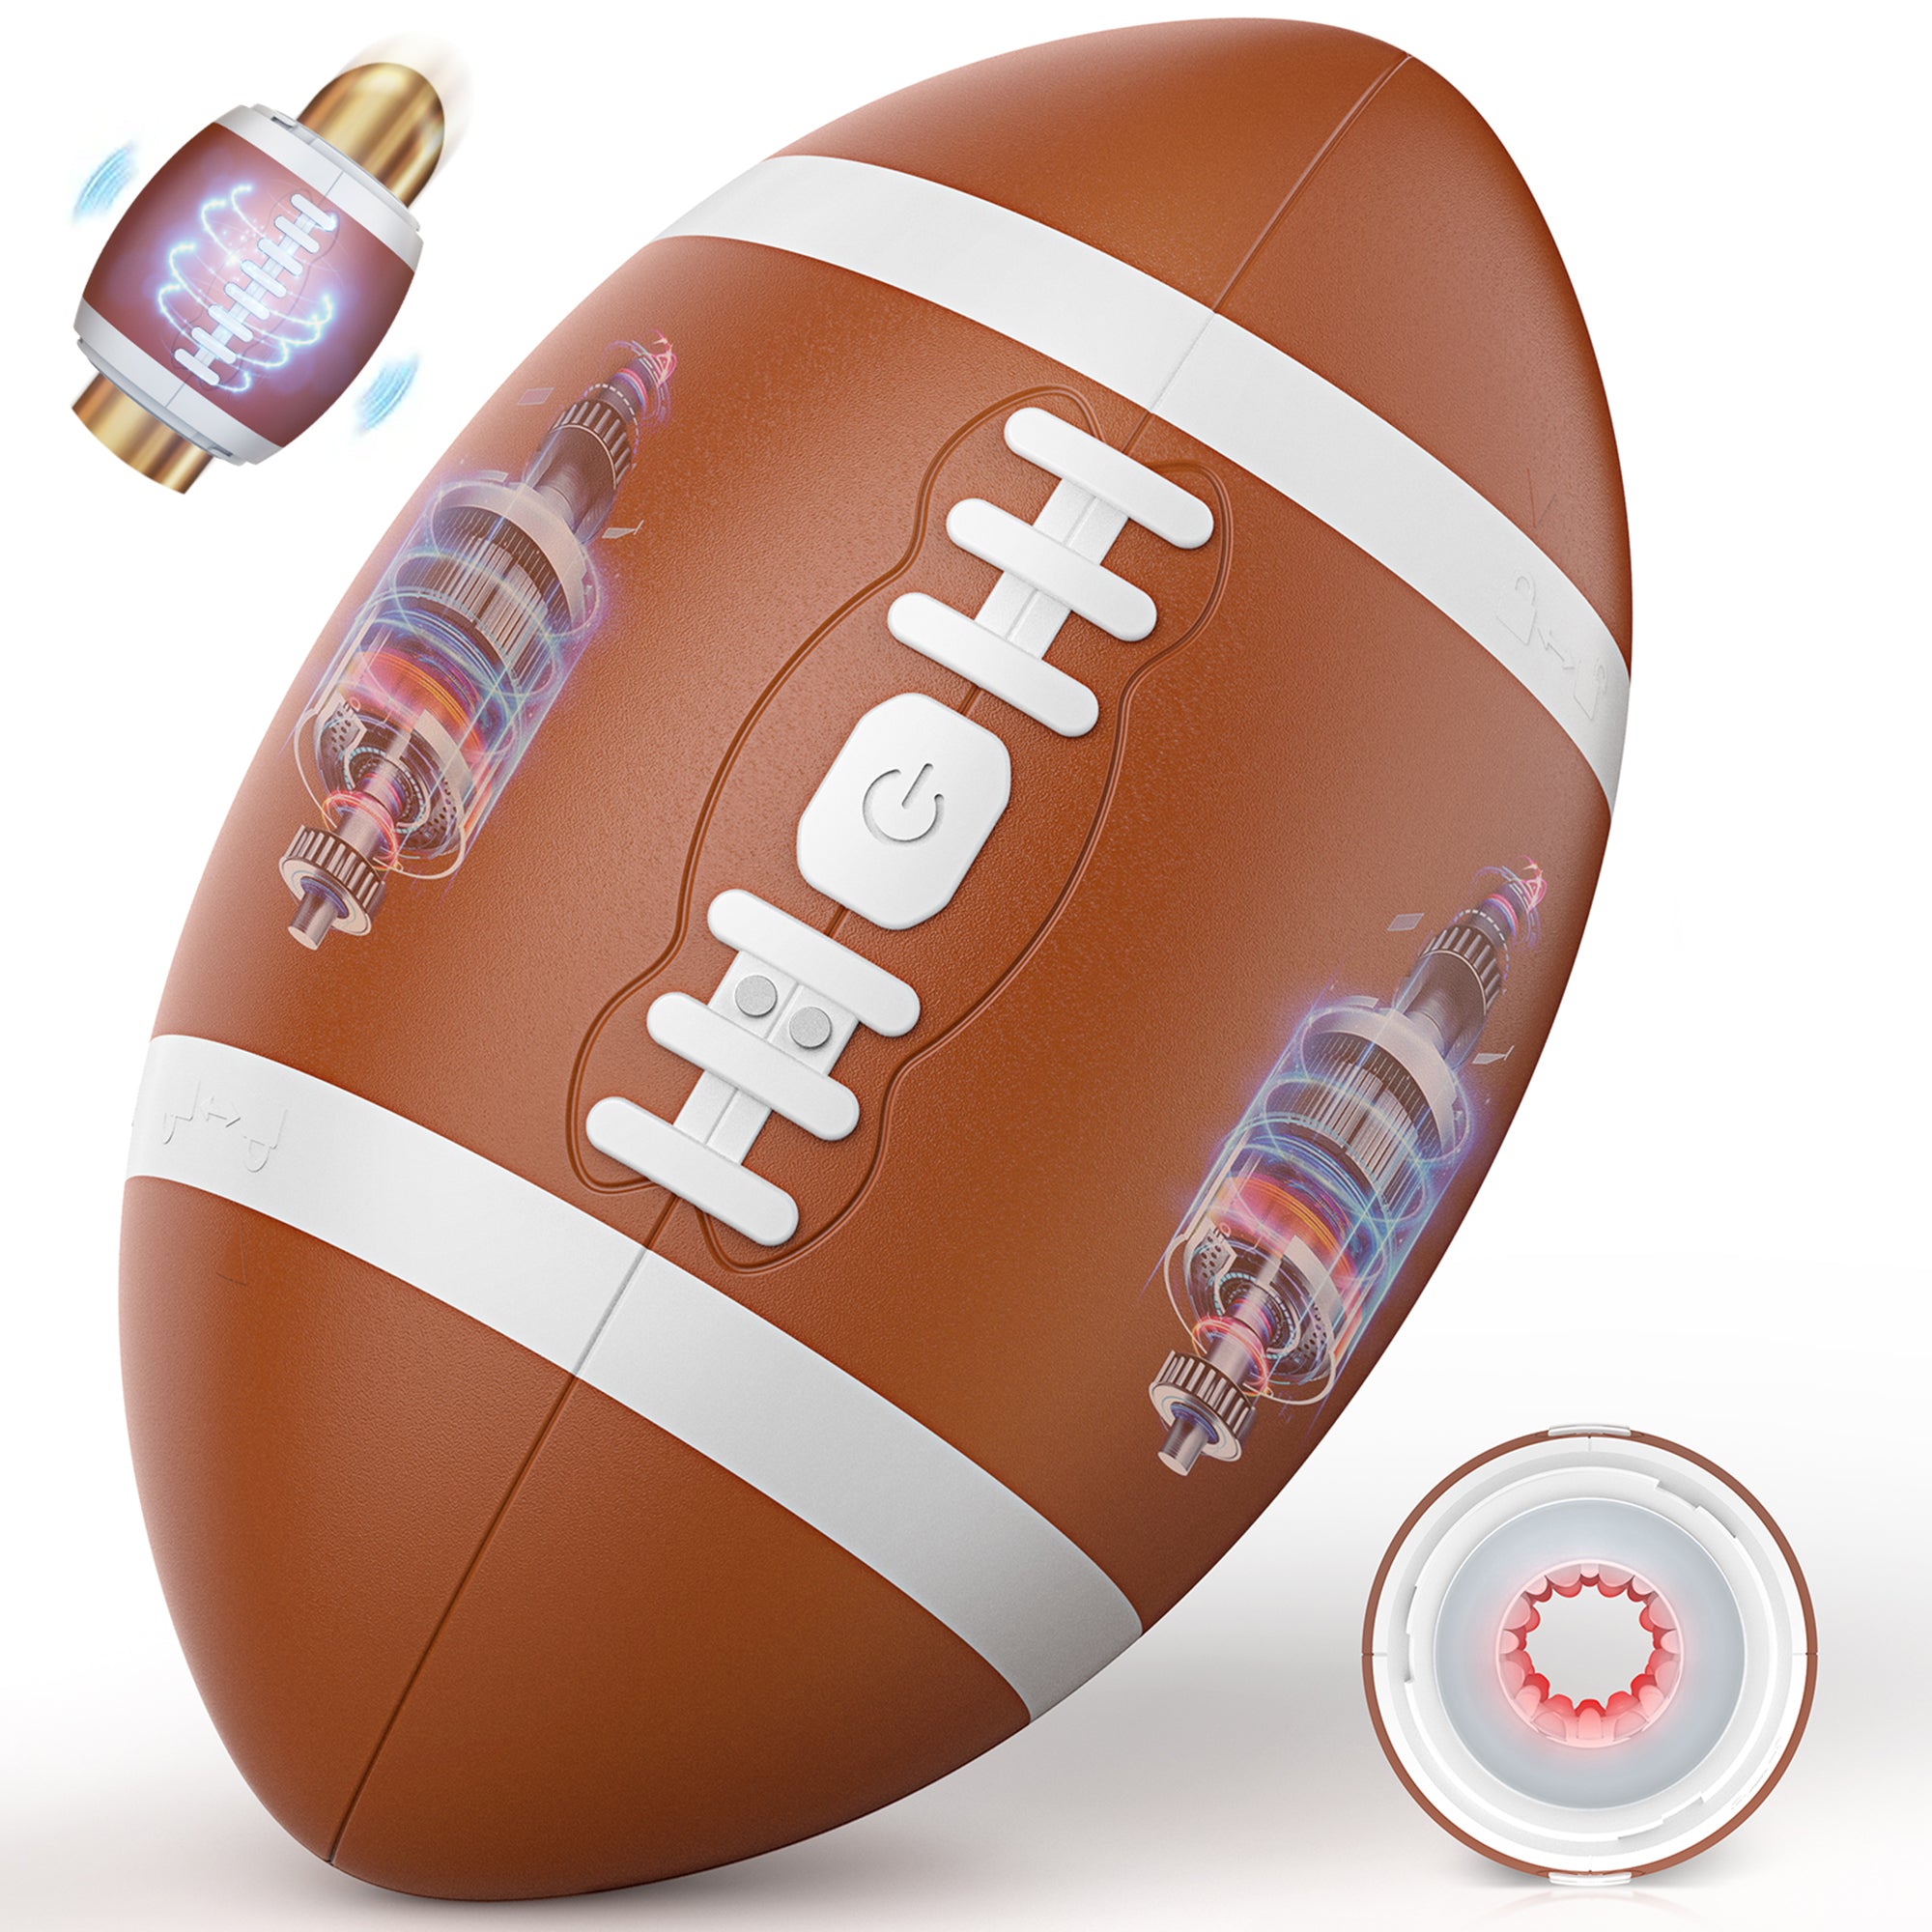 FIDECH Rugby Shaped Open-Ended 12 Vibrating Male Masturbation Cup